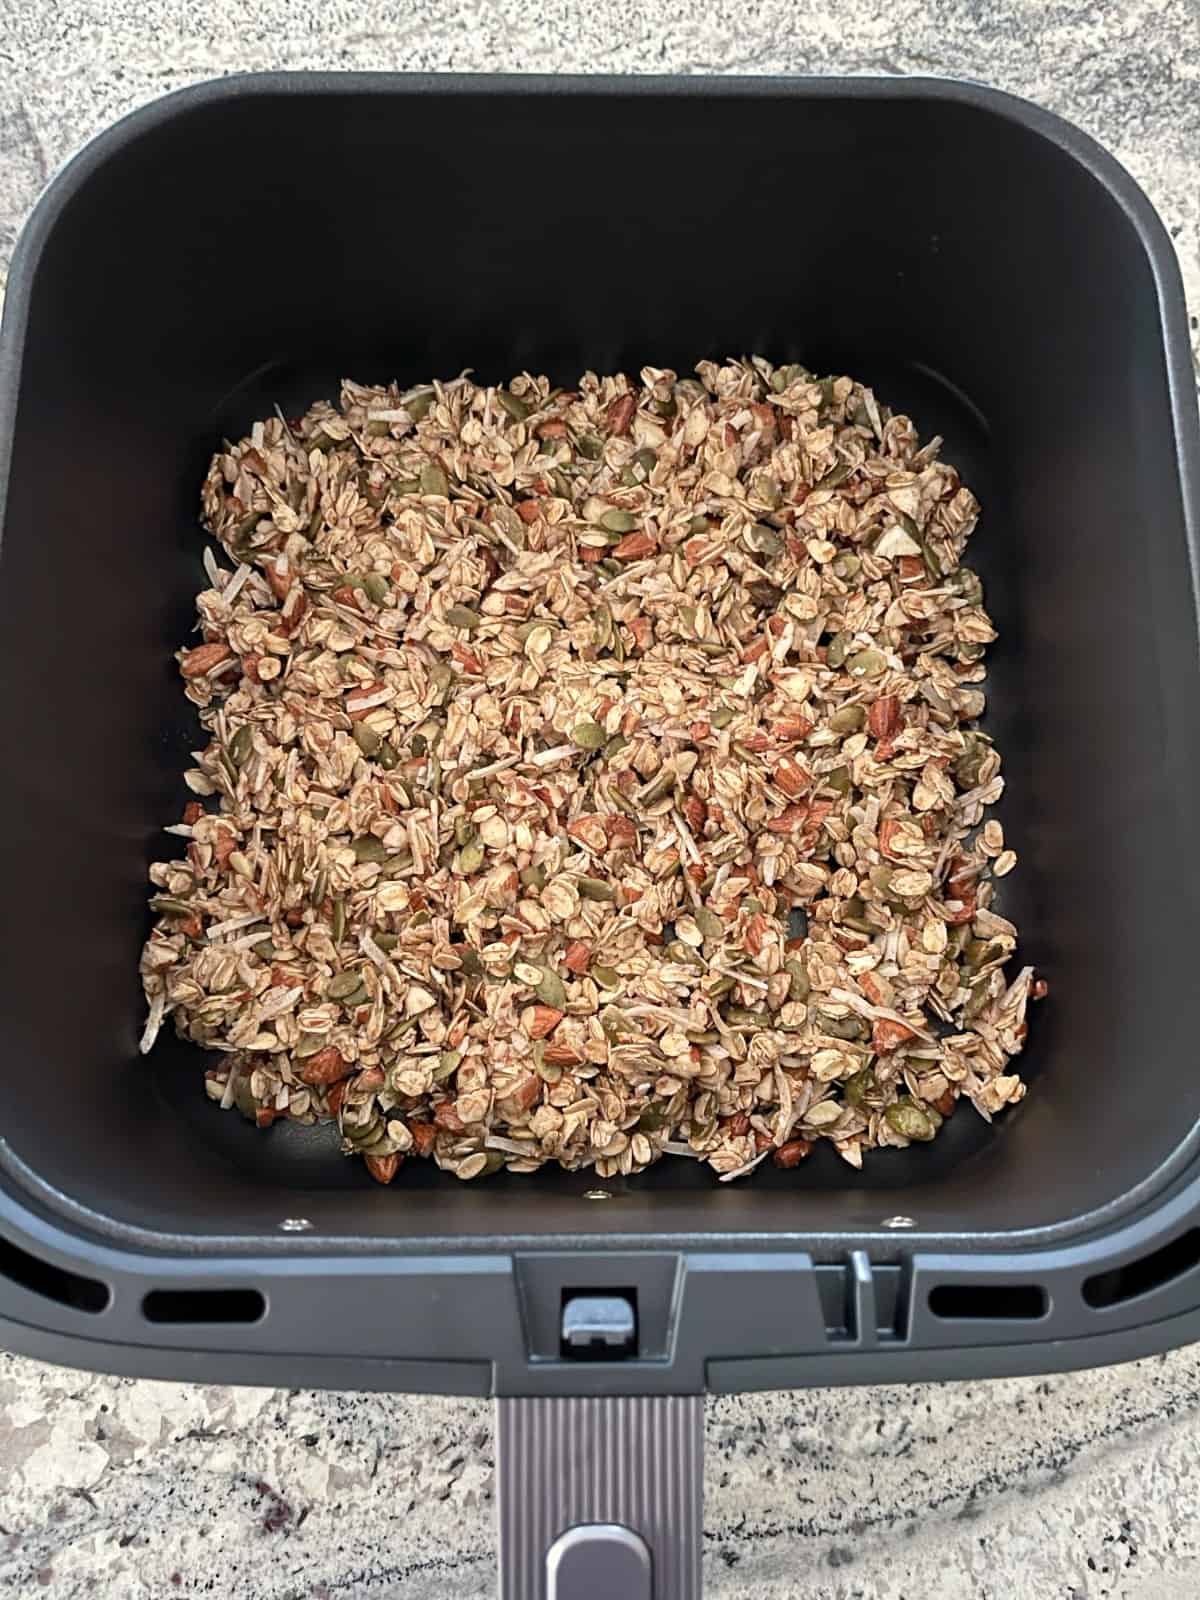 Uncooked air fryer granola in preheated cooking basket.